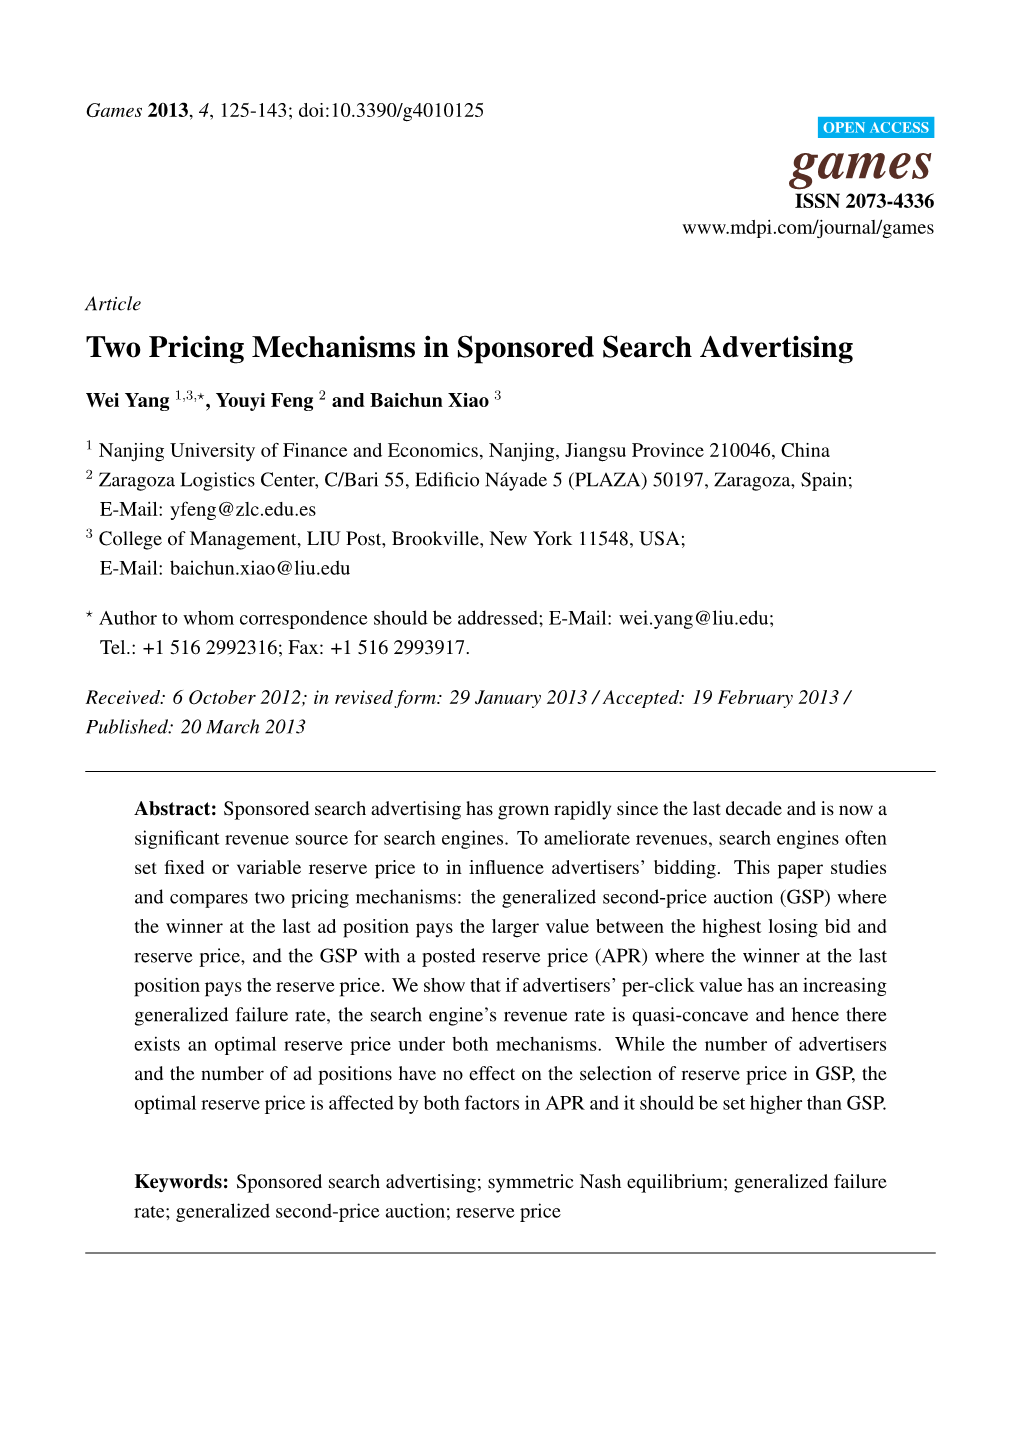 Two Pricing Mechanisms in Sponsored Search Advertising